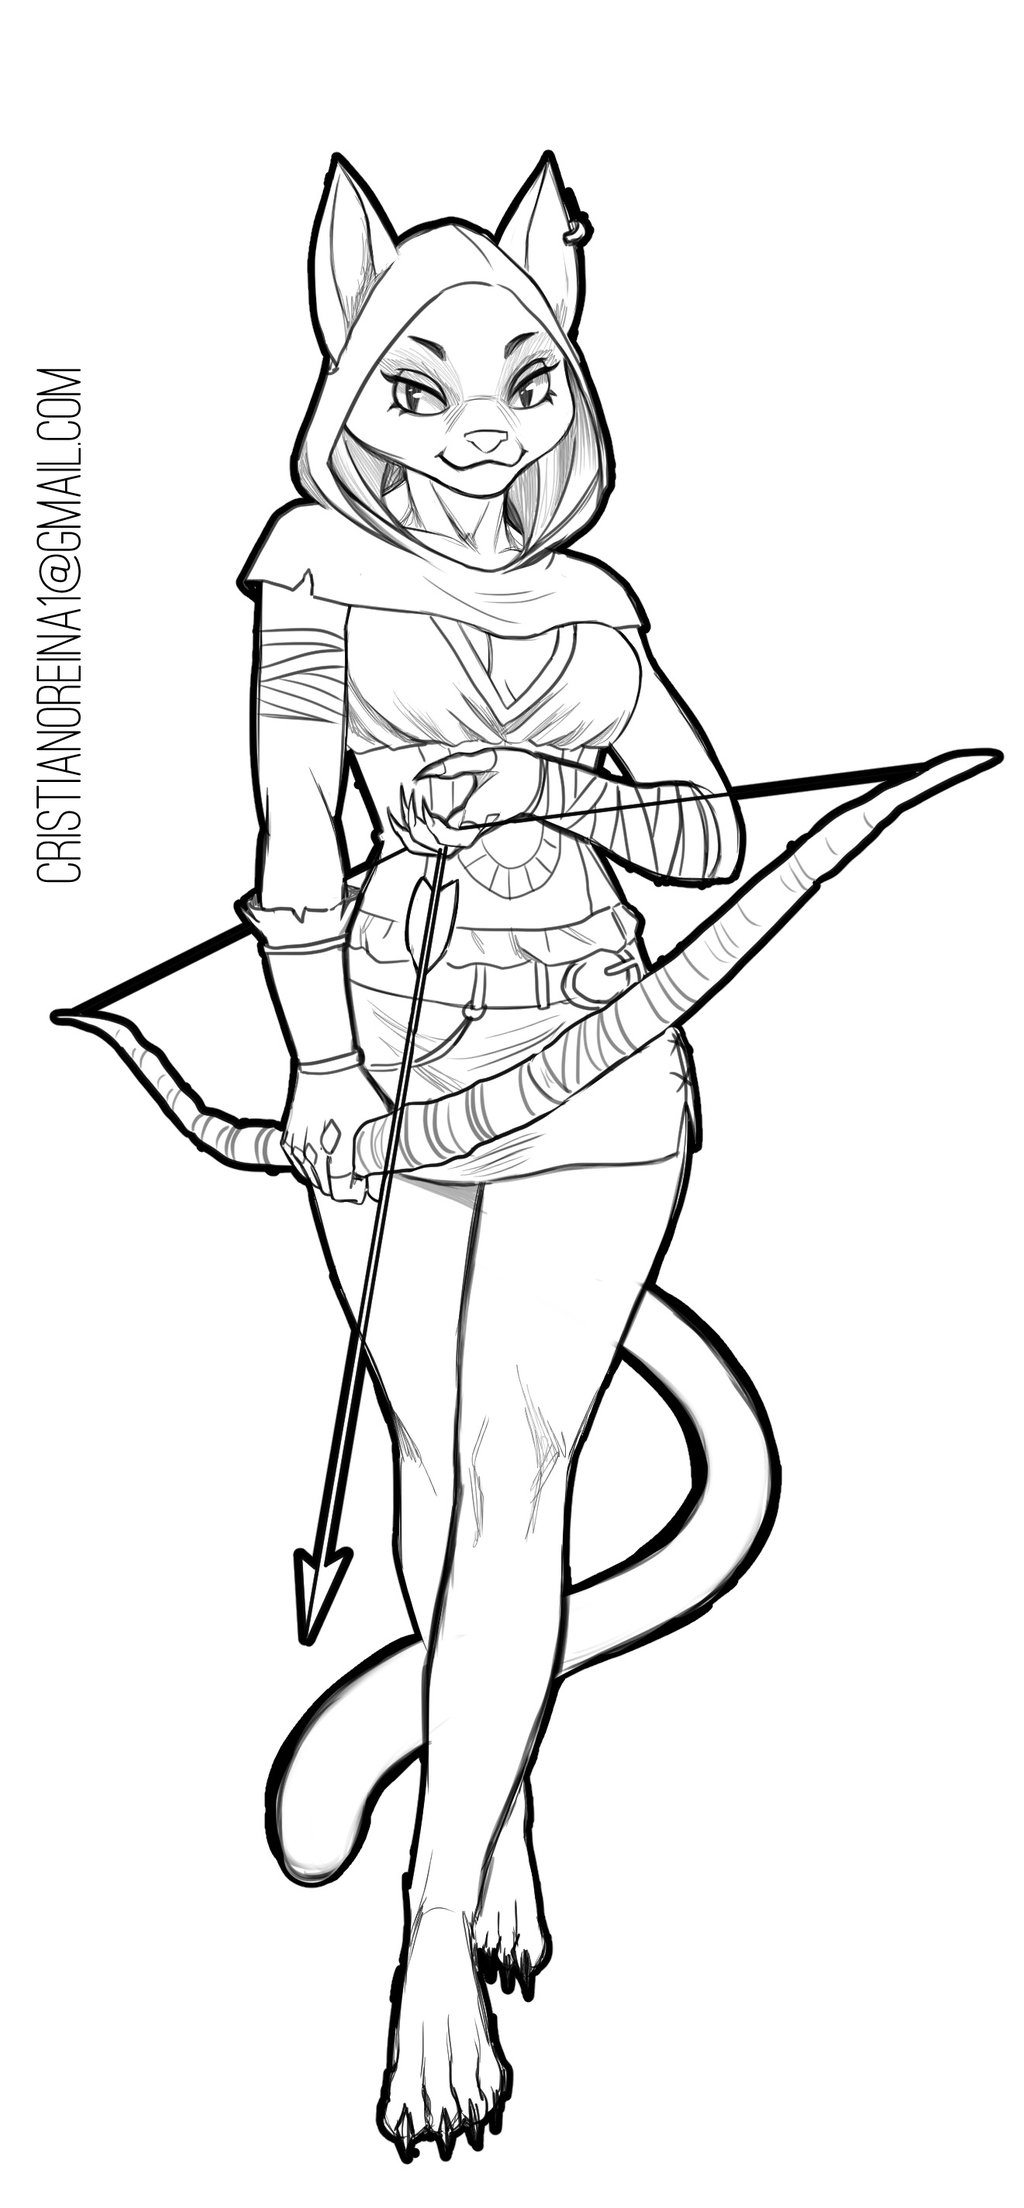 Most recent image: Tabaxi rogue wip